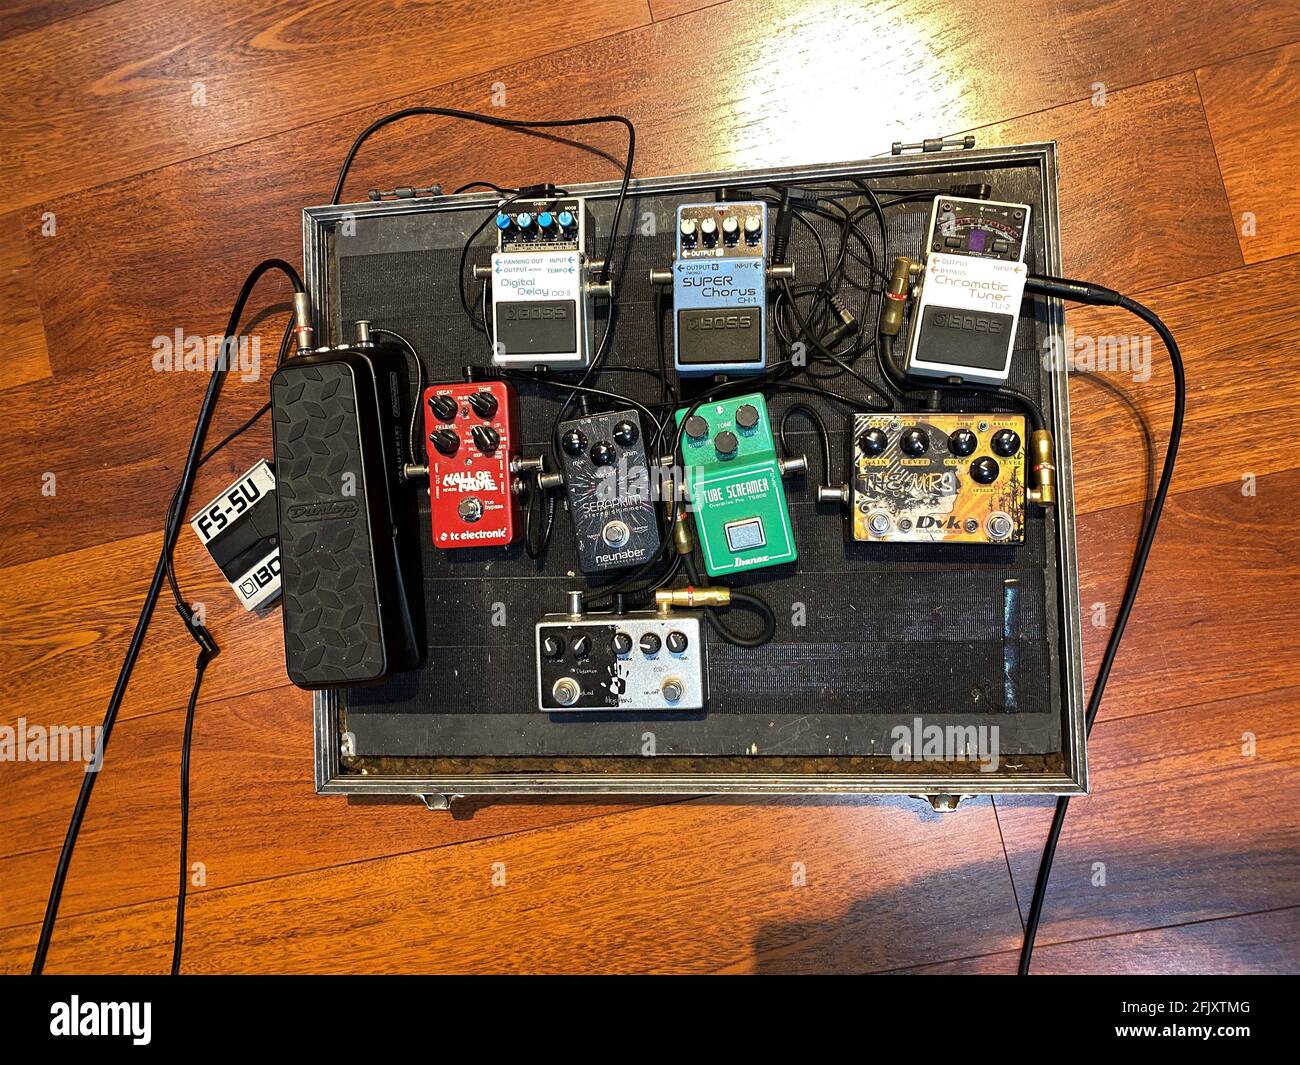 Professional pedal board, electric guitar pedal set. Some pedals are custom  made pedals. Some brands included are Ibanez, DVK technologies and Boss  Stock Photo - Alamy